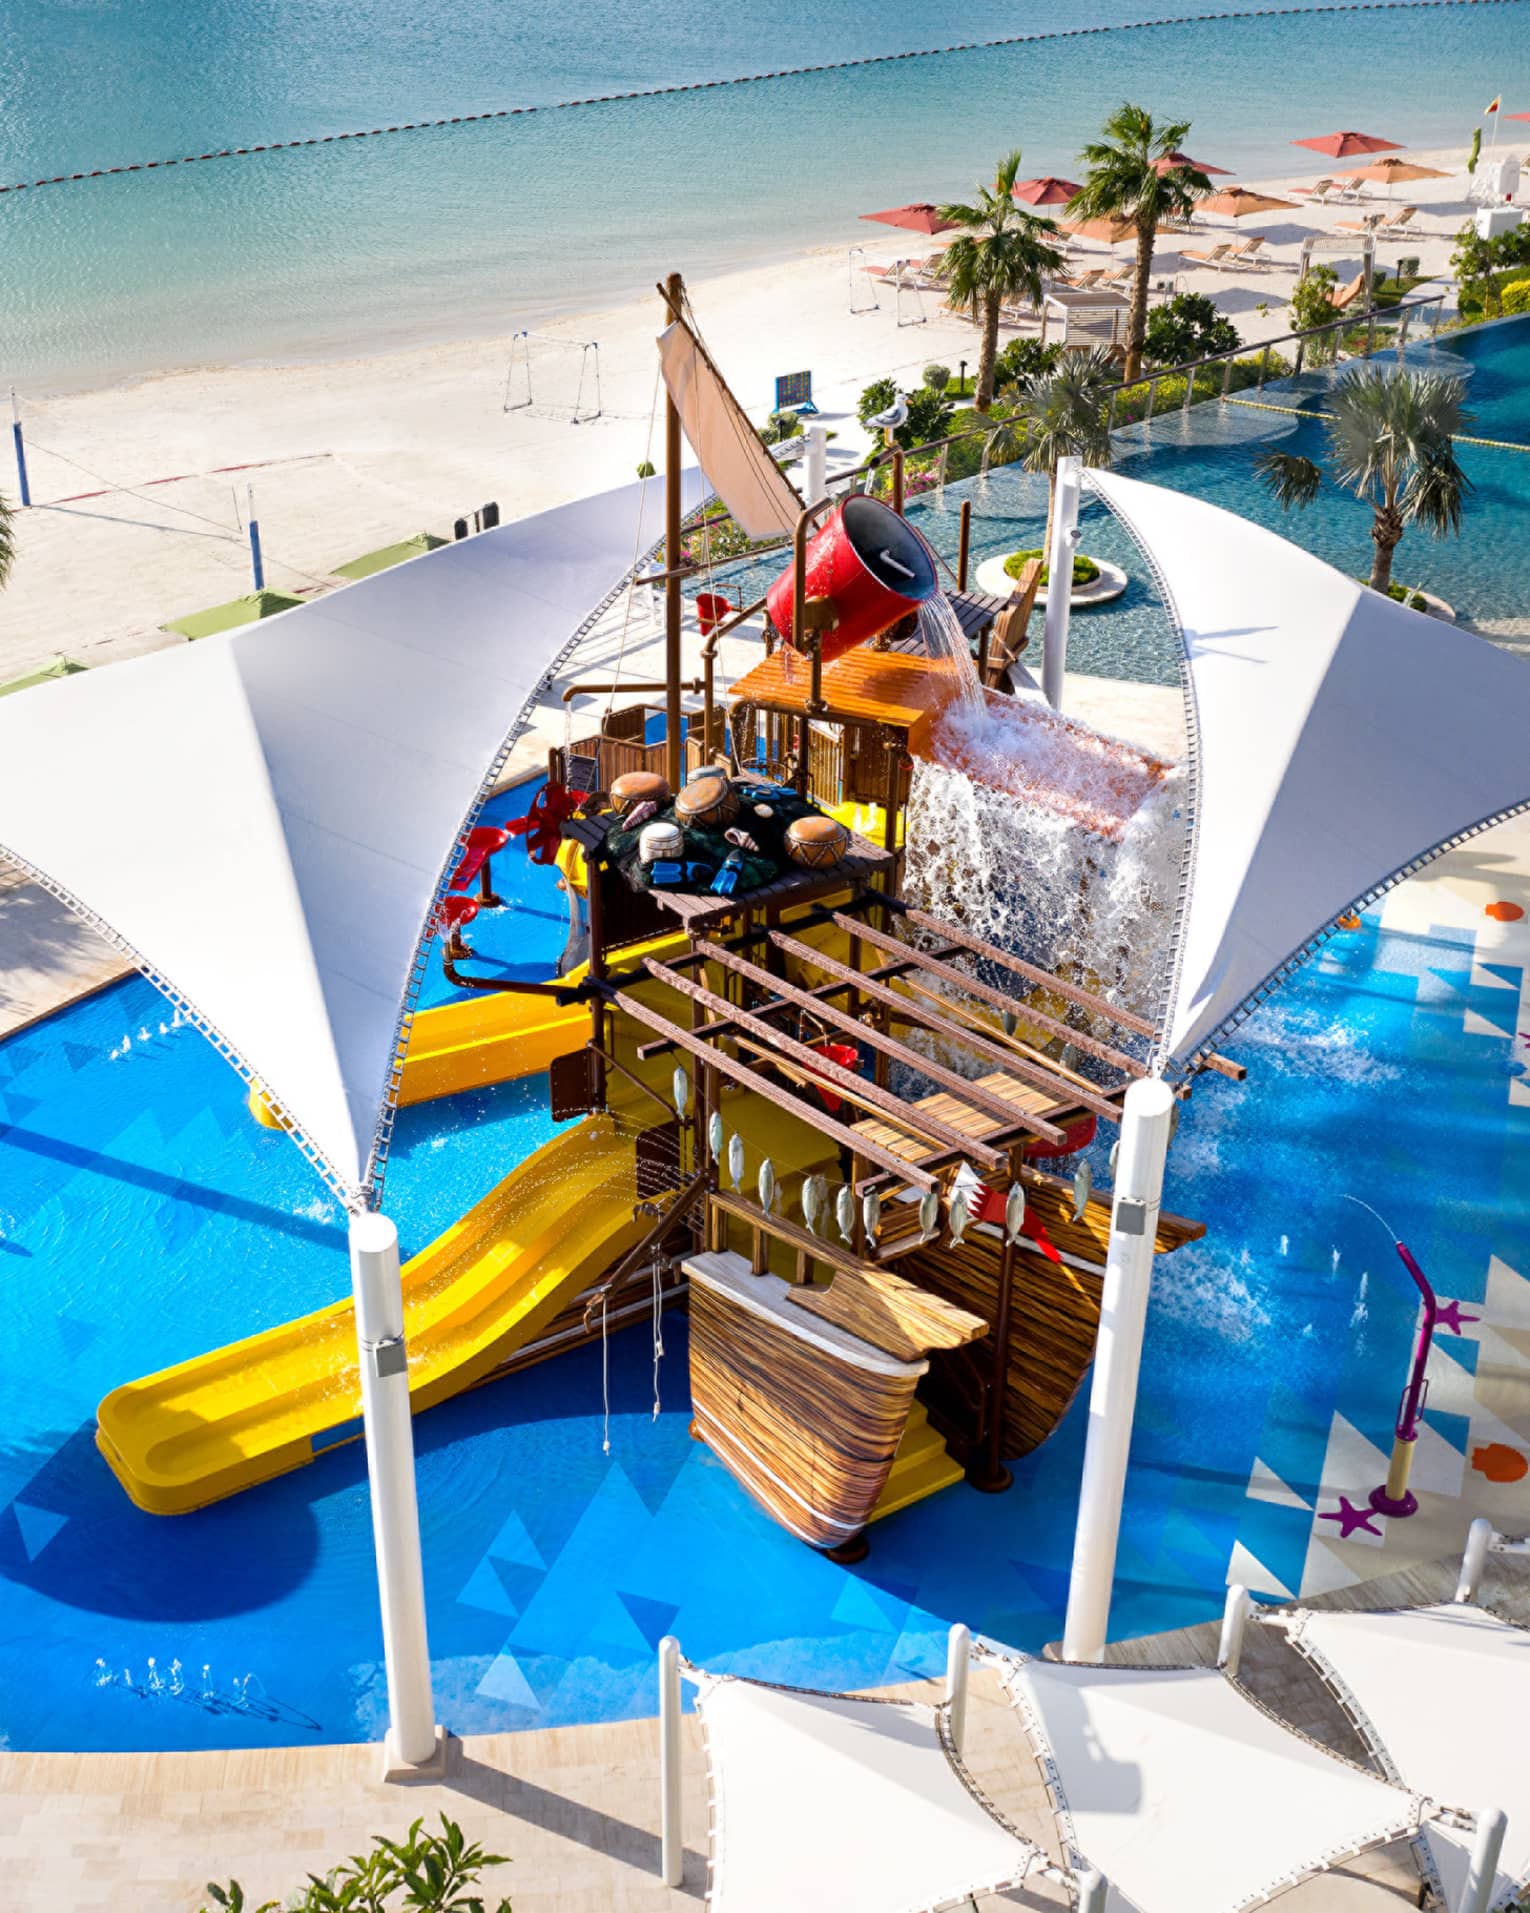 A large orange waterslide built into a faux pirate ship descending into a crystal blue pool of water.